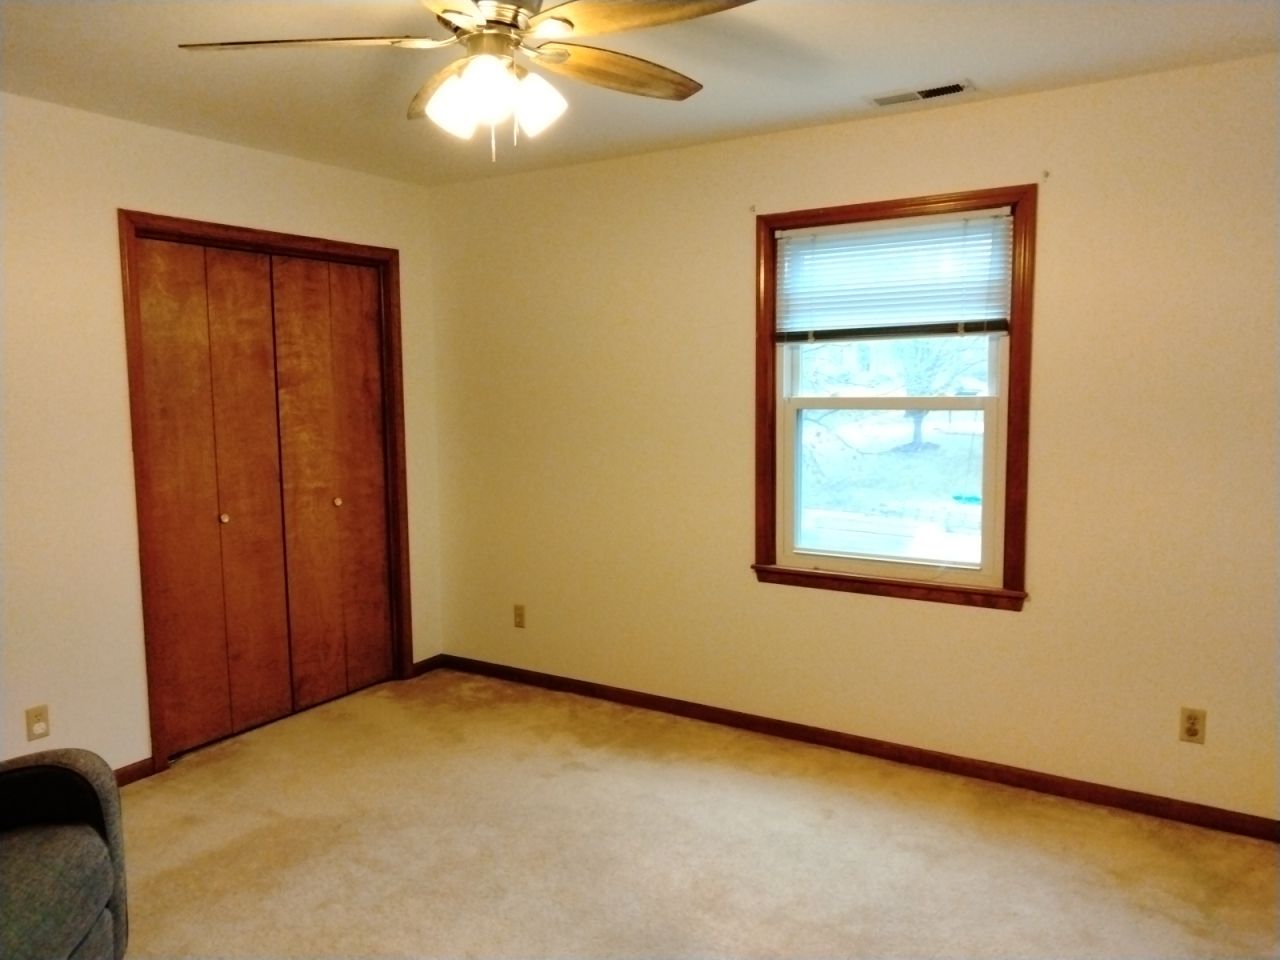 An empty room with a window and ceiling fan- Lawrence, KS interior house painters